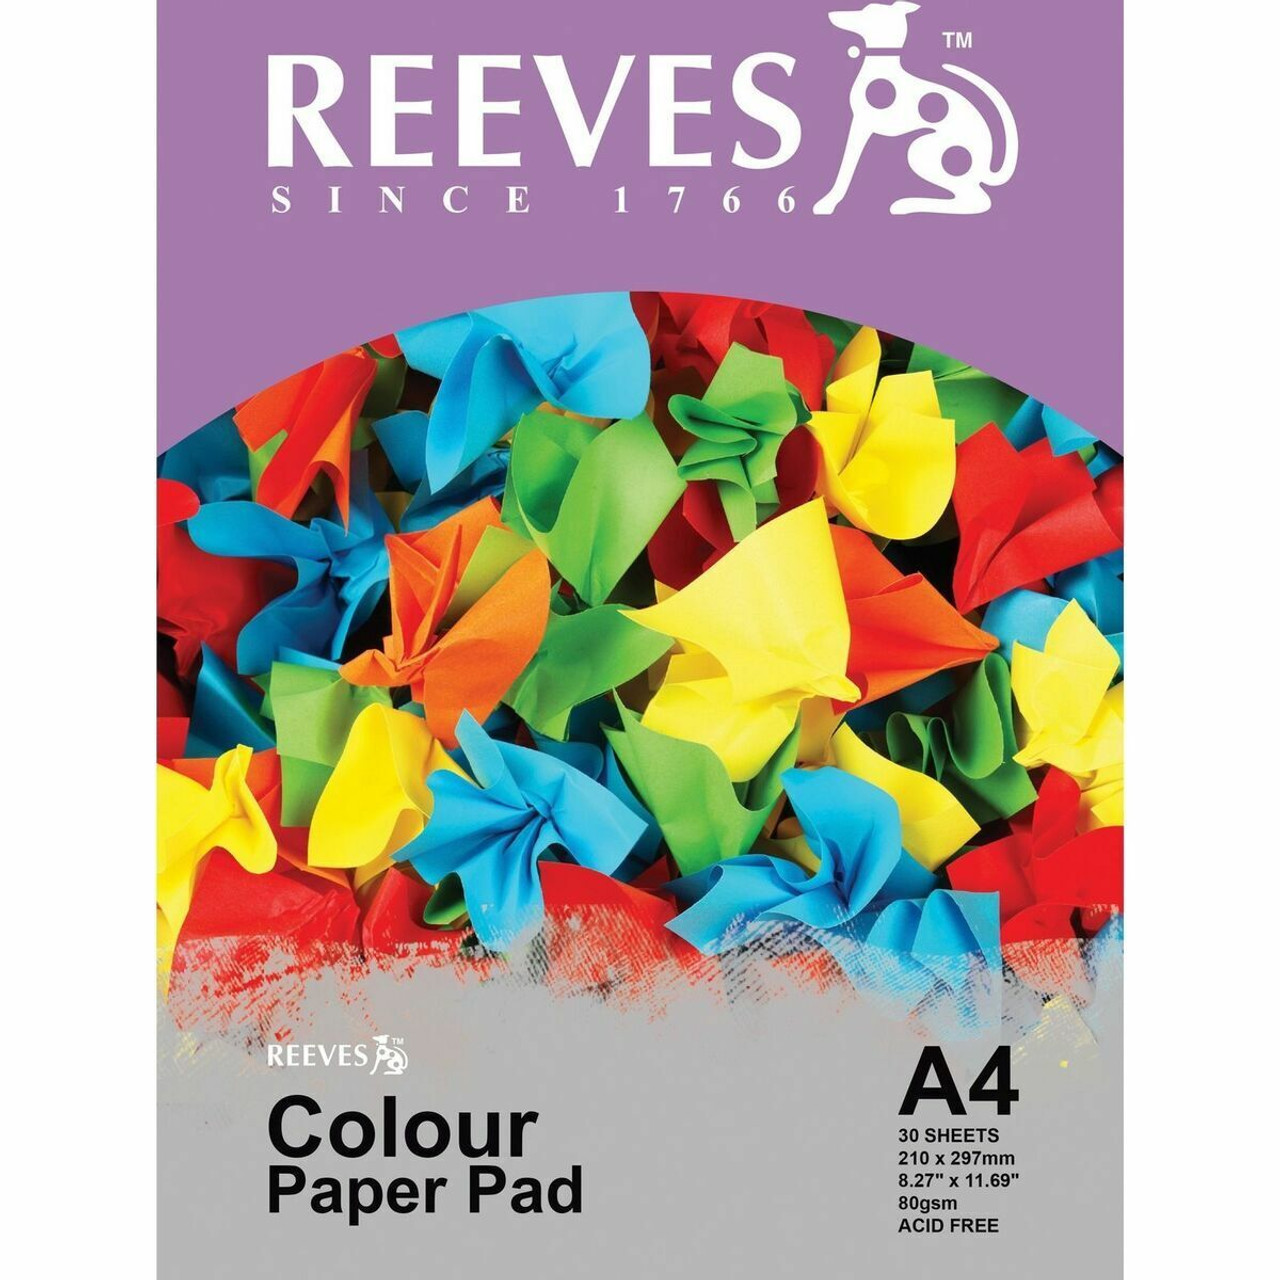 Reeves Colour Paper Pad